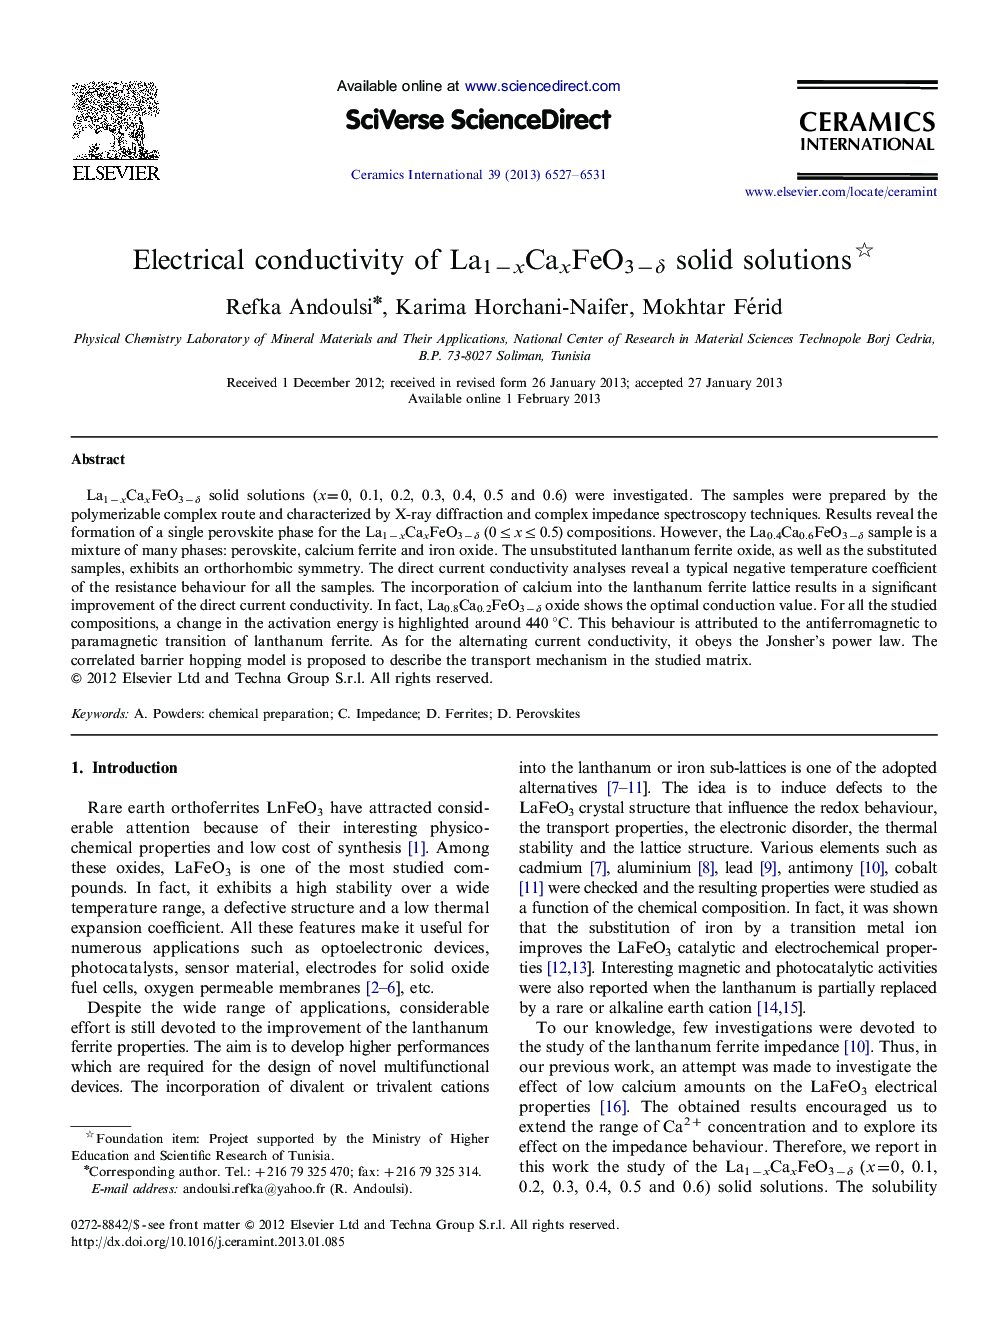 Electrical conductivity of La1−xCaxFeO3−δ solid solutions 